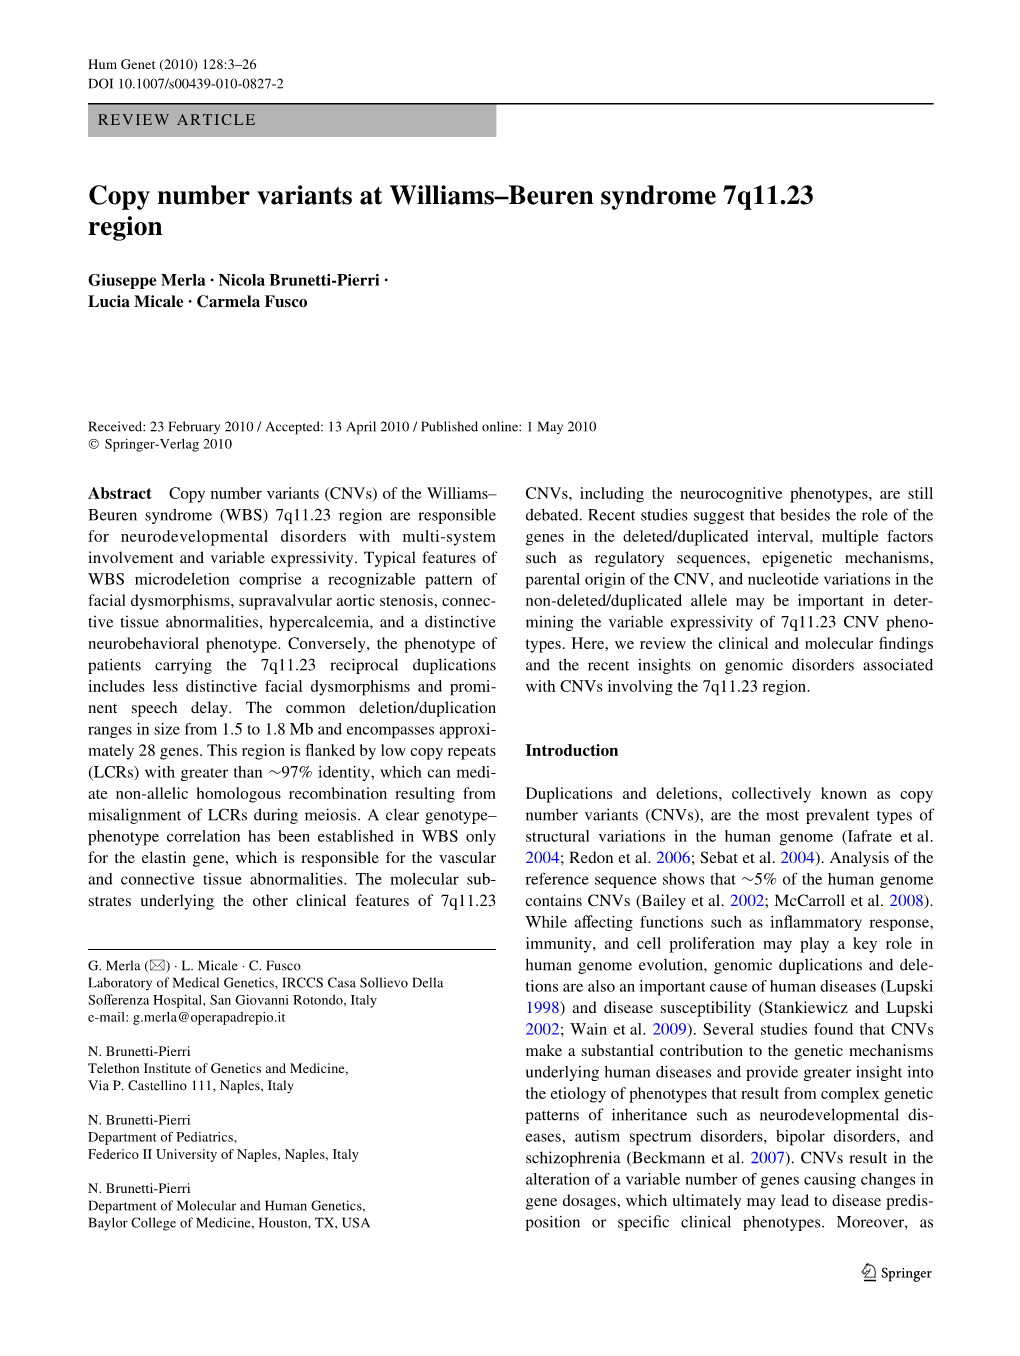 Copy Number Variants at Williams–Beuren Syndrome 7Q11.23 Region